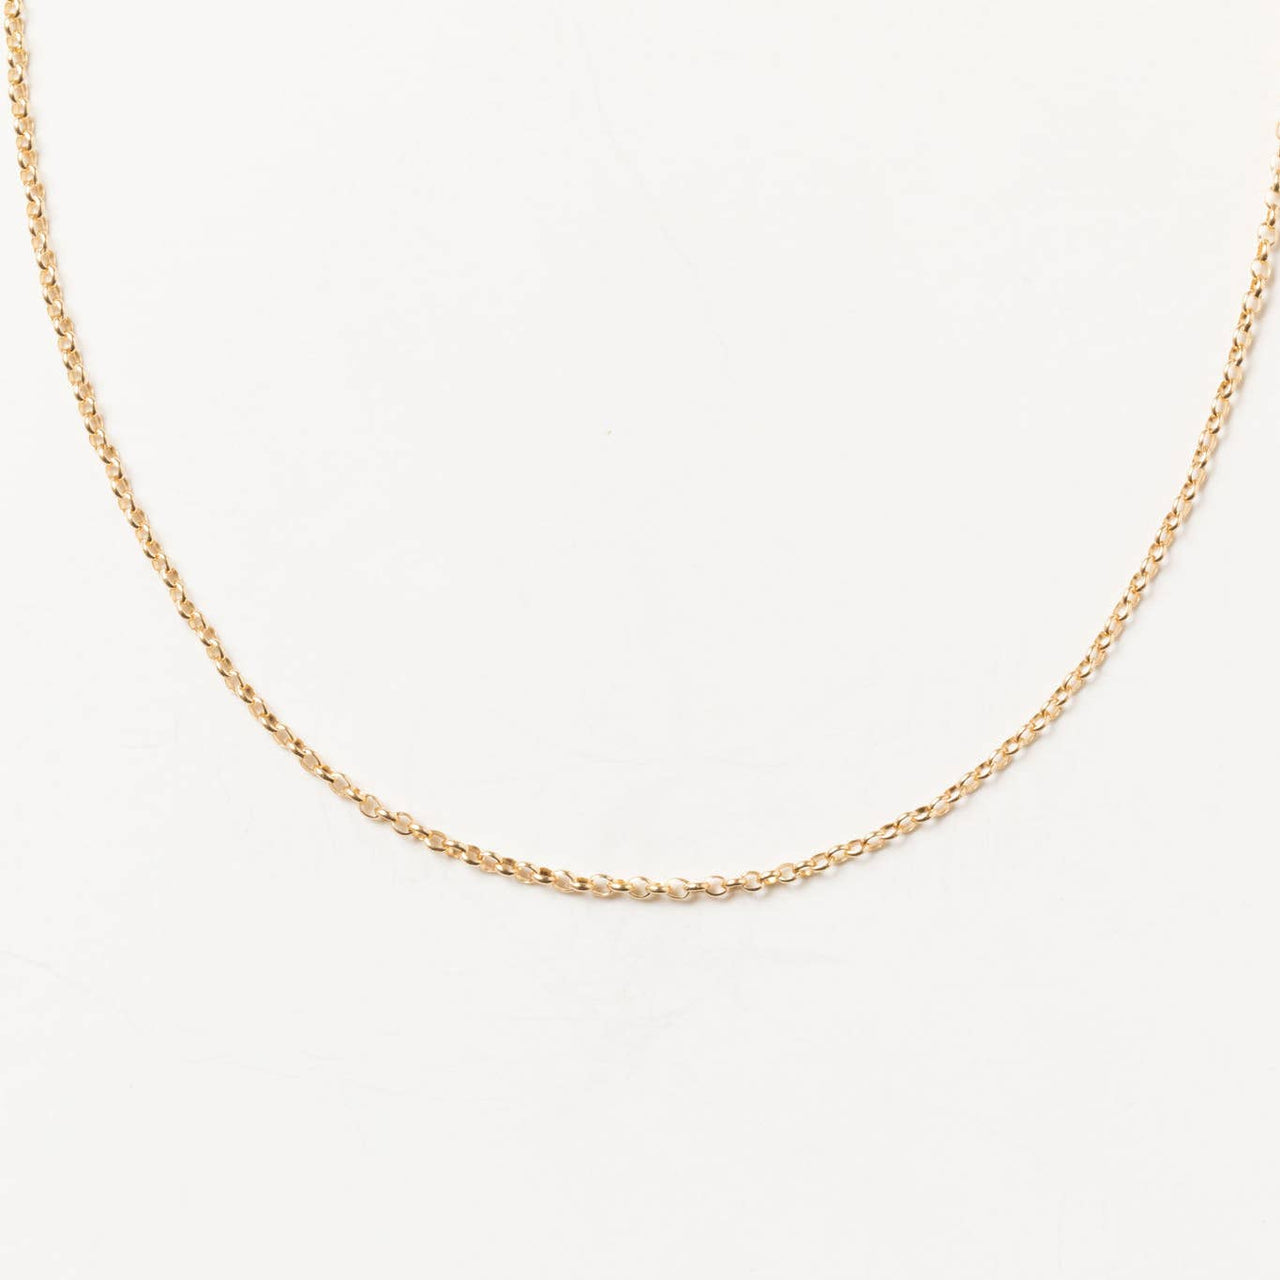 16" Minimal Gold Necklace